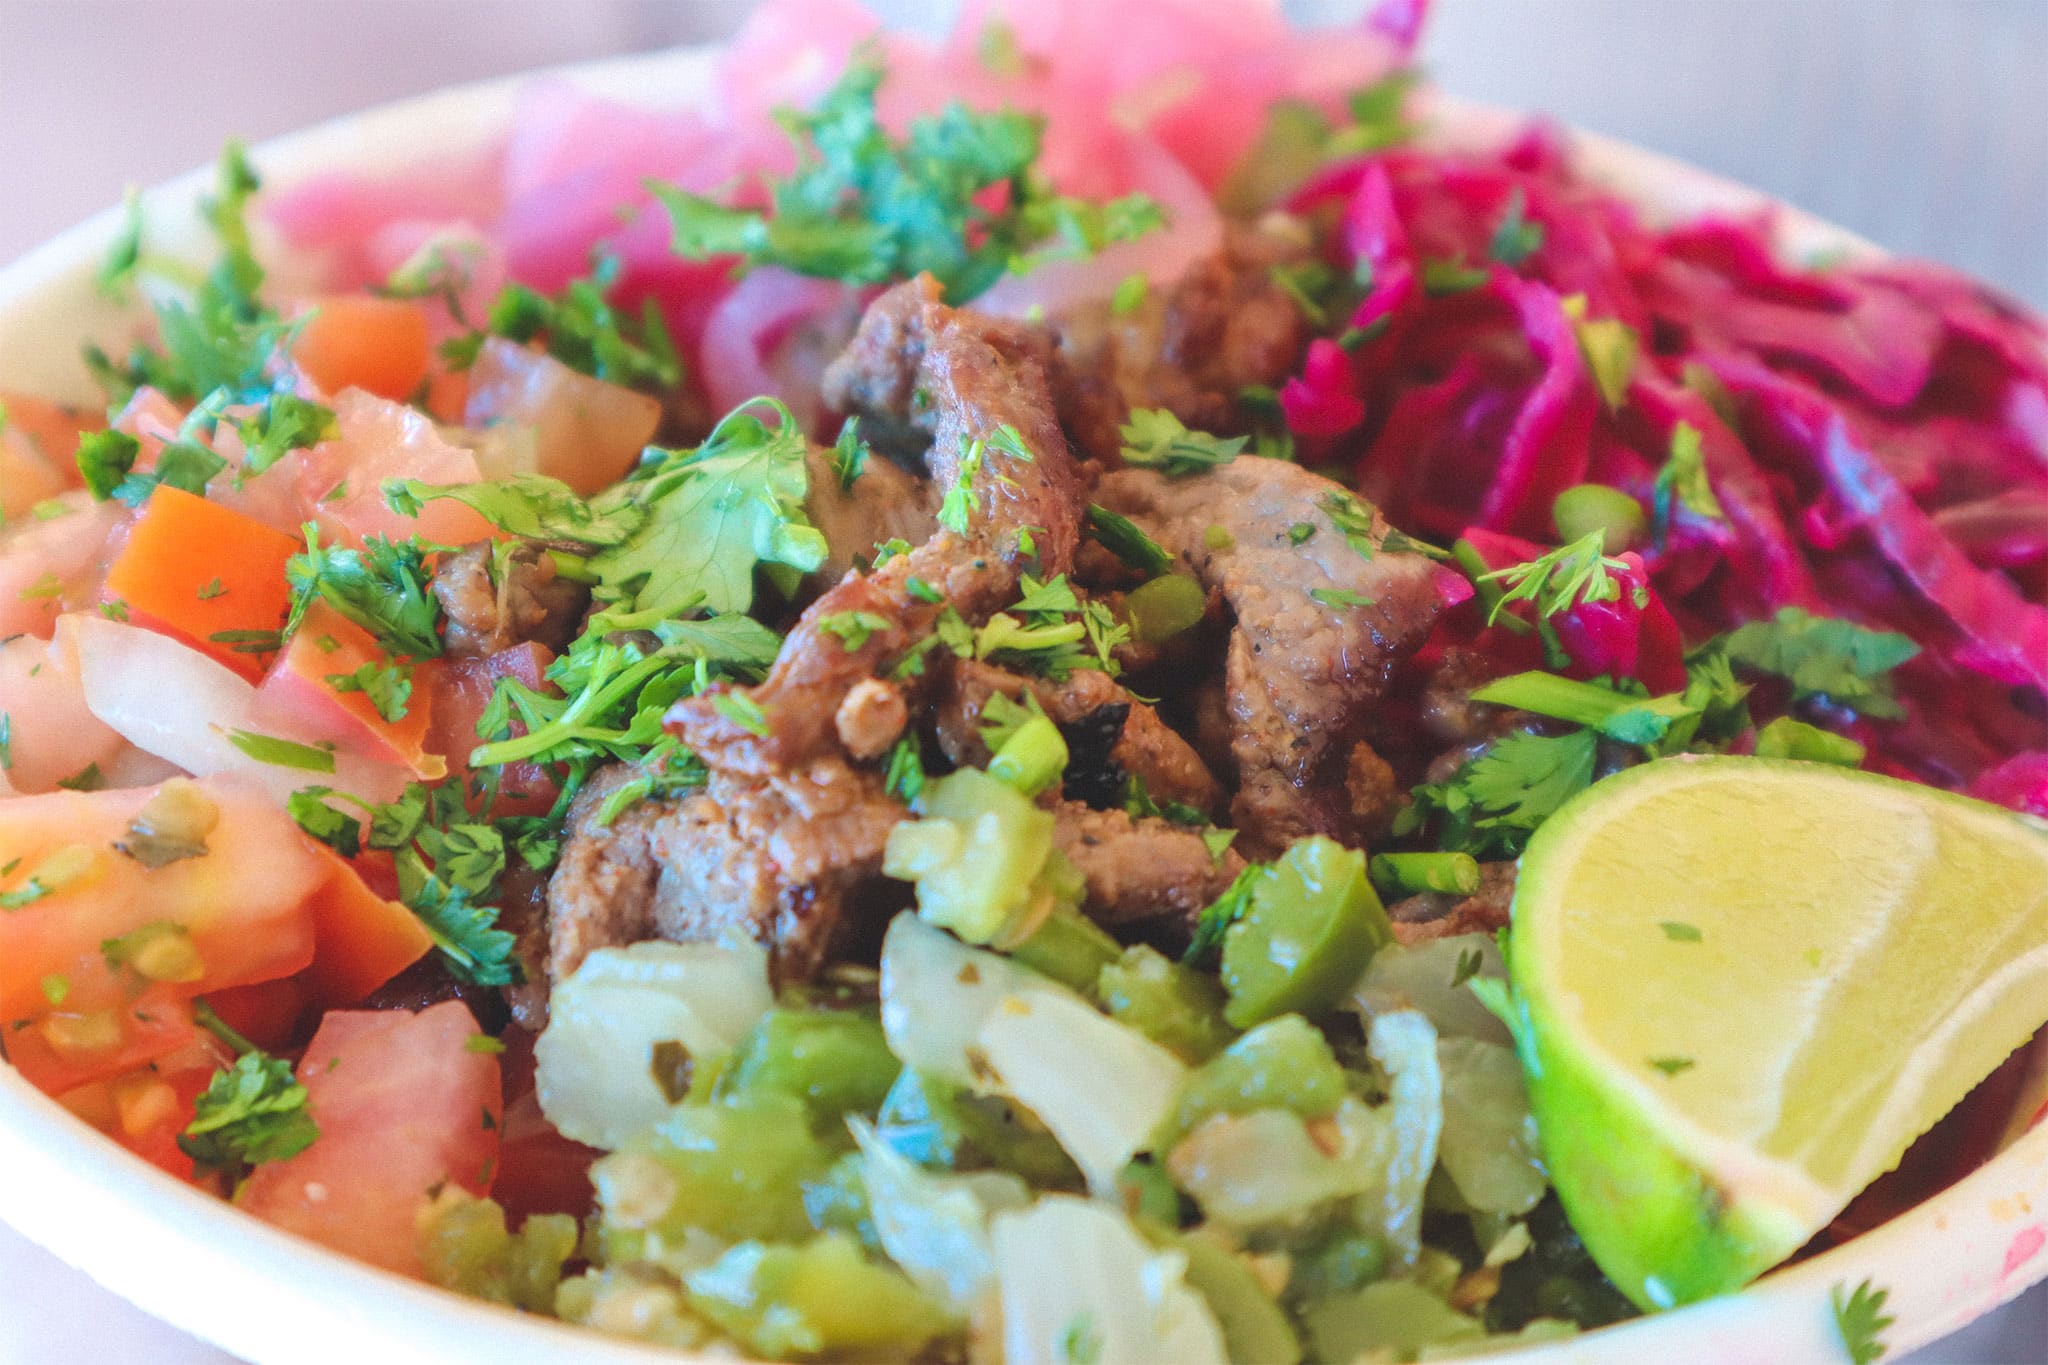 Close up photo of Poppo's bowl with beef and pico de gallo